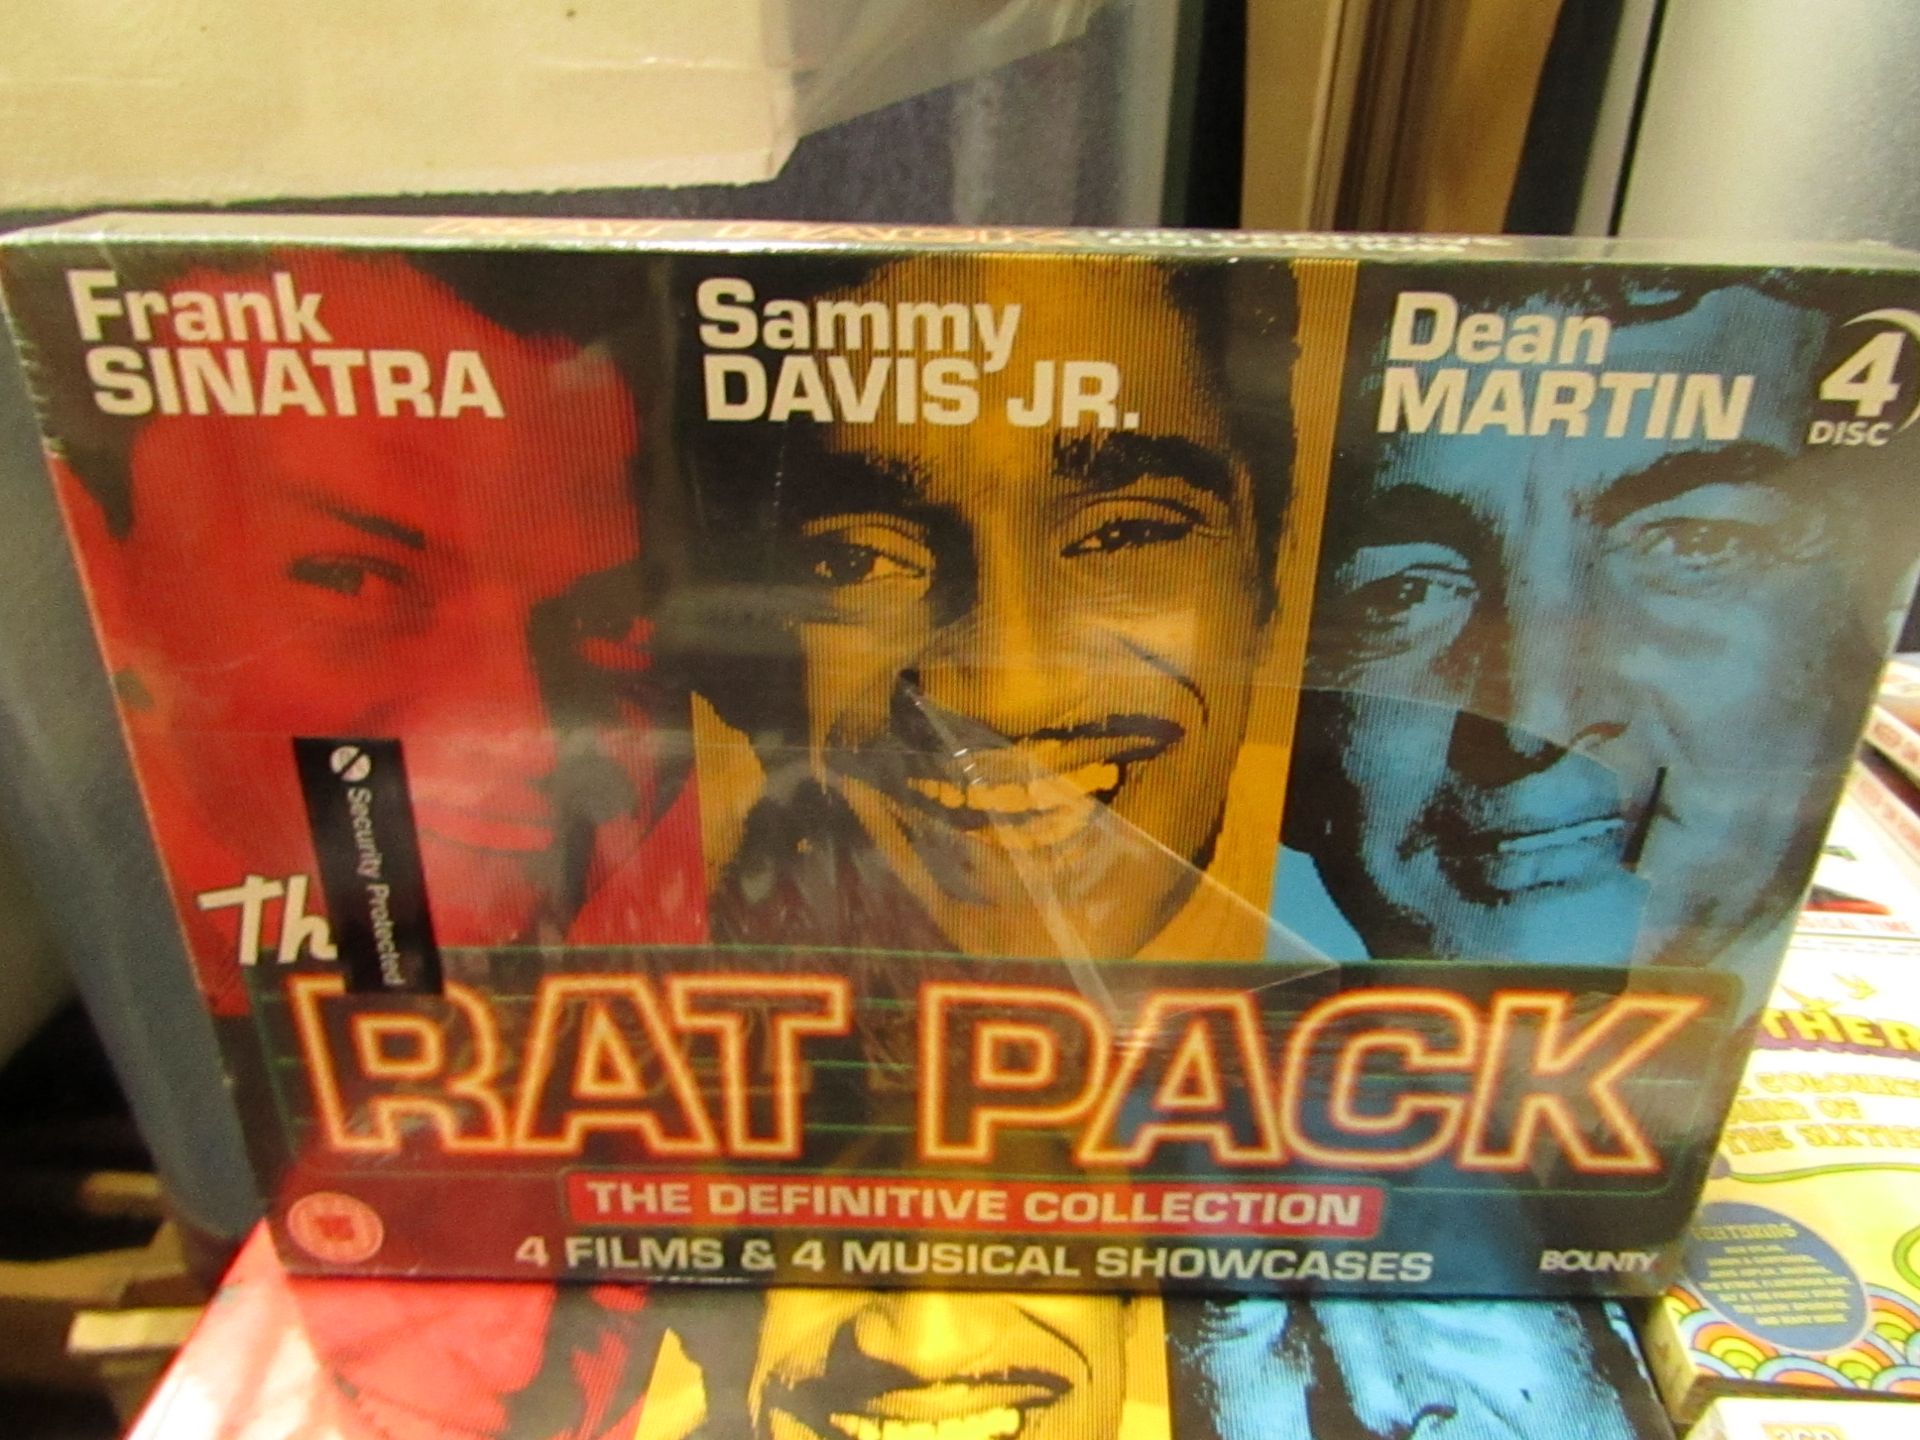 The Rat Pack - The Definitive Collection 4 Films & 4 Musical Showcases Set - Unused & Sealed.